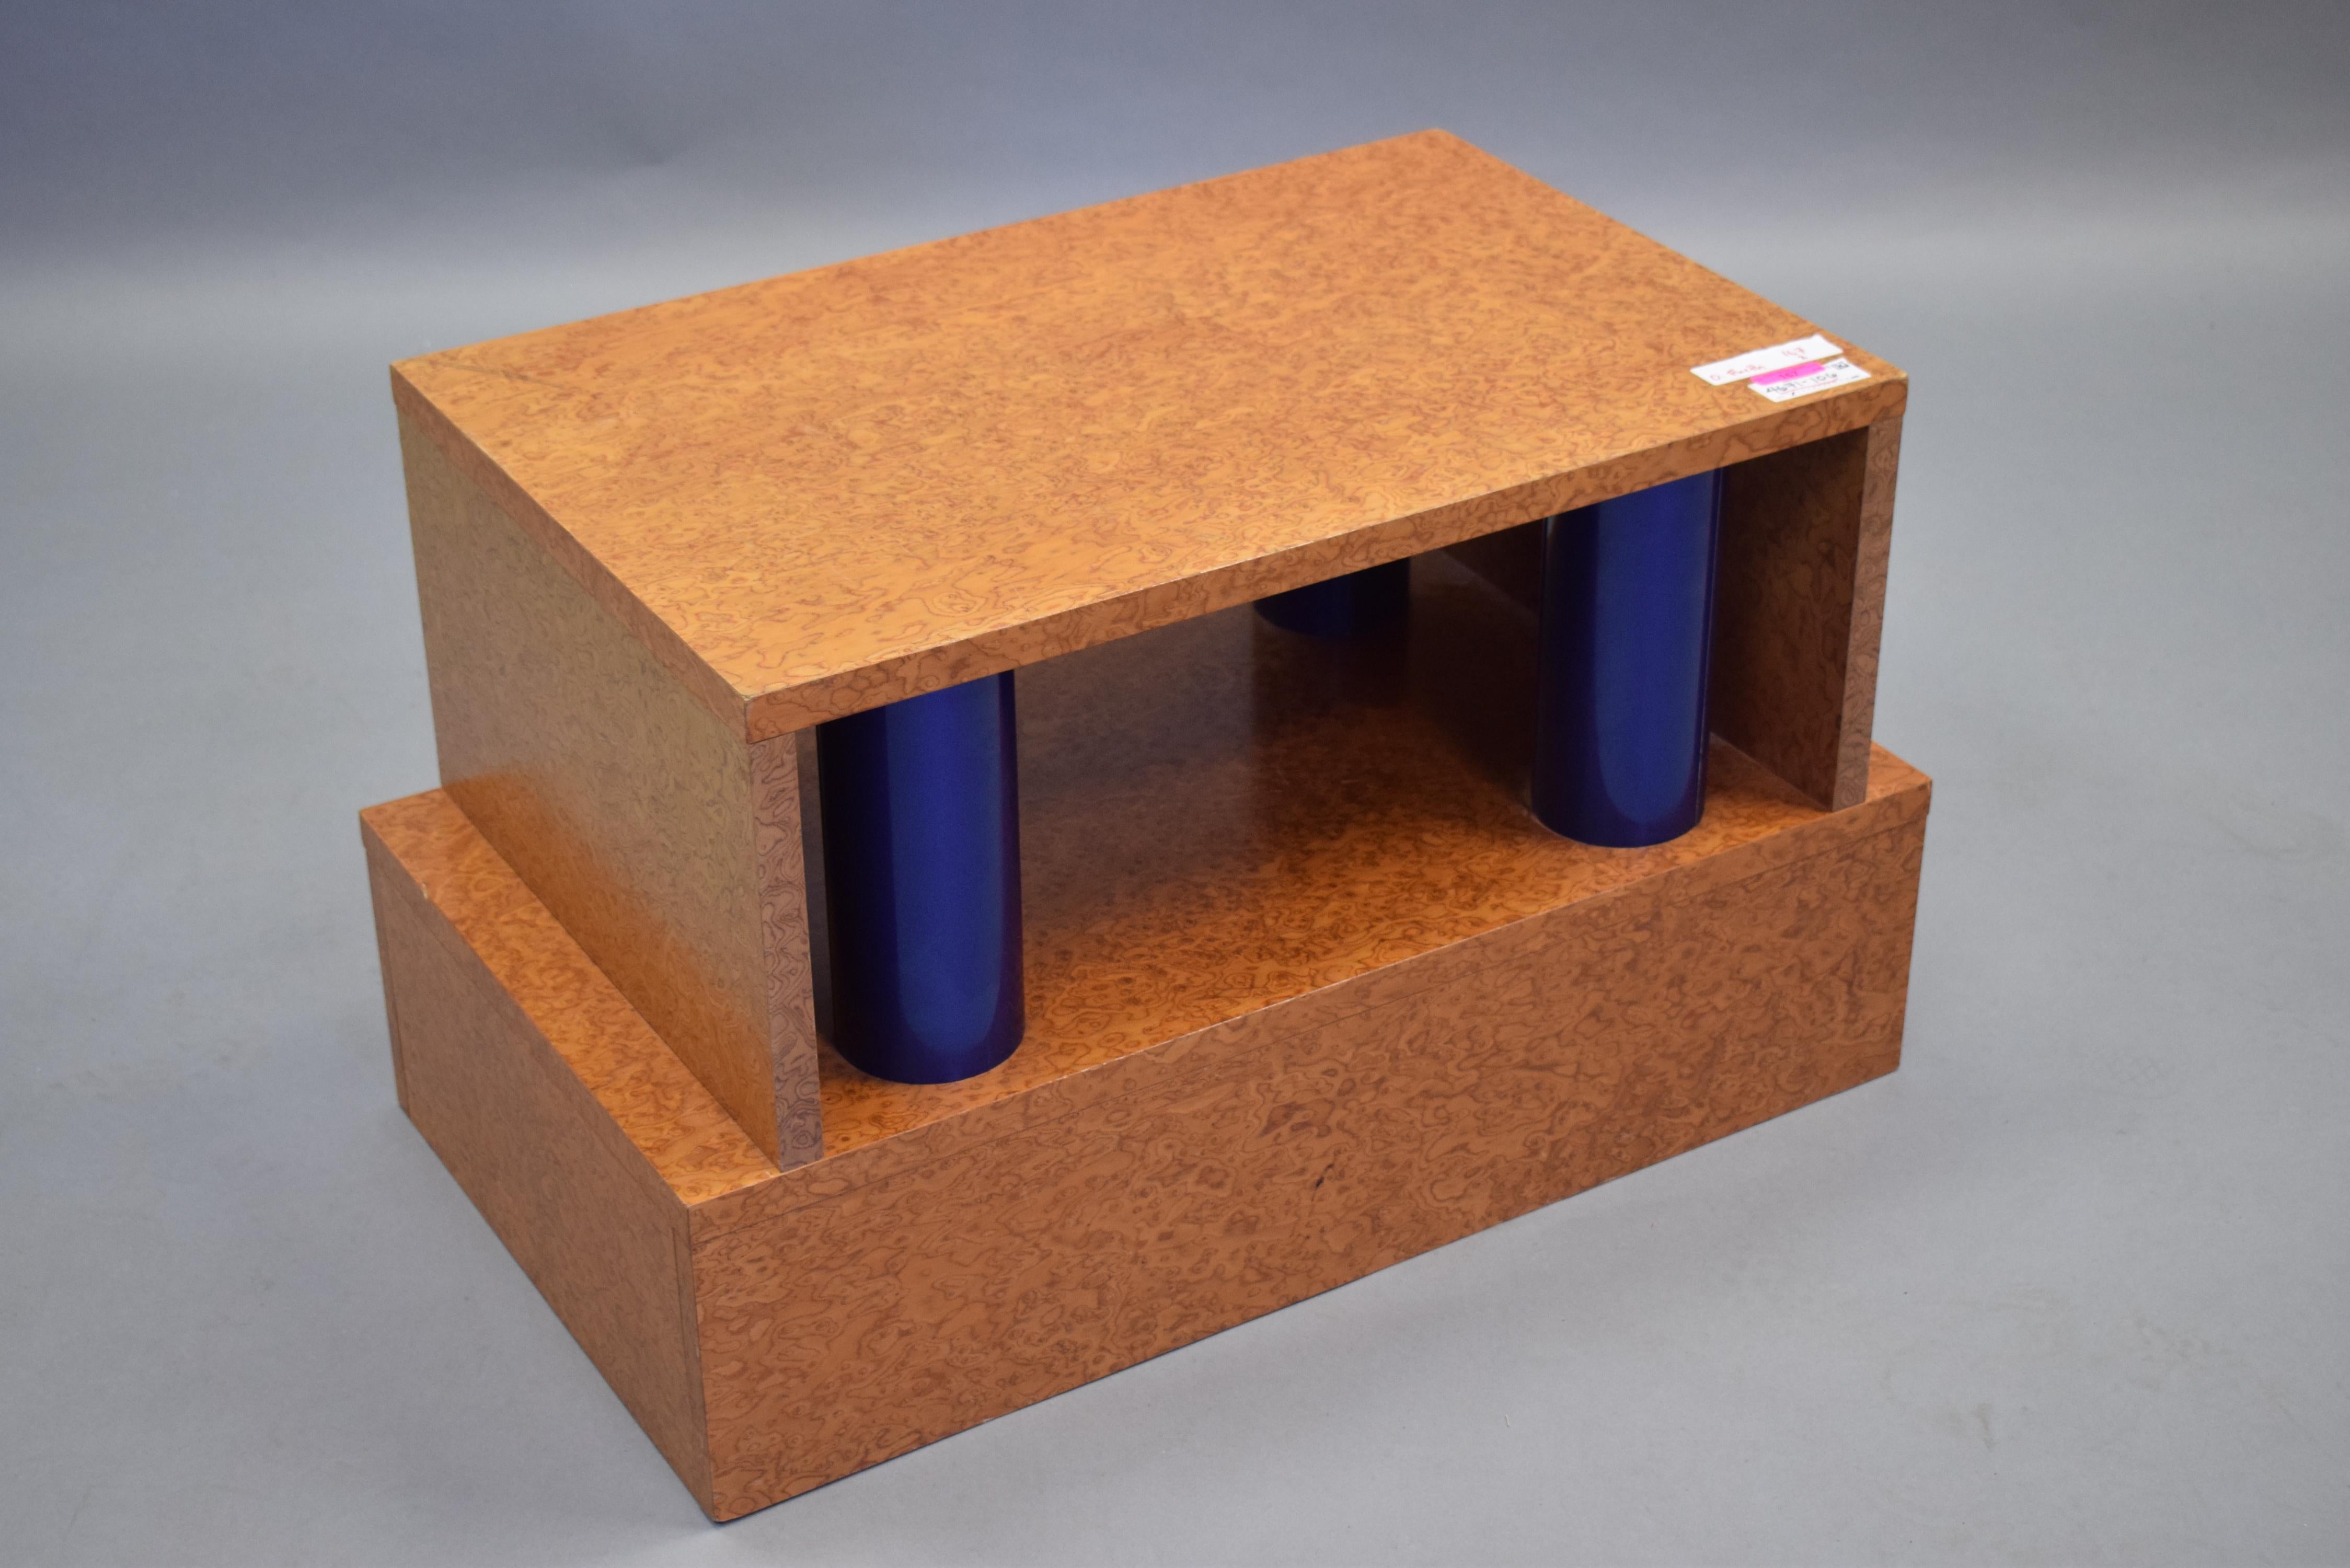 Incredibly rare and exceptional post-modern coffee table by the two of the masters of design, Ettore Sottsass and Marco Zanini. Table is executed in birds eye maple has blue tubular steel rods support the tabletop and creates a visually interesting